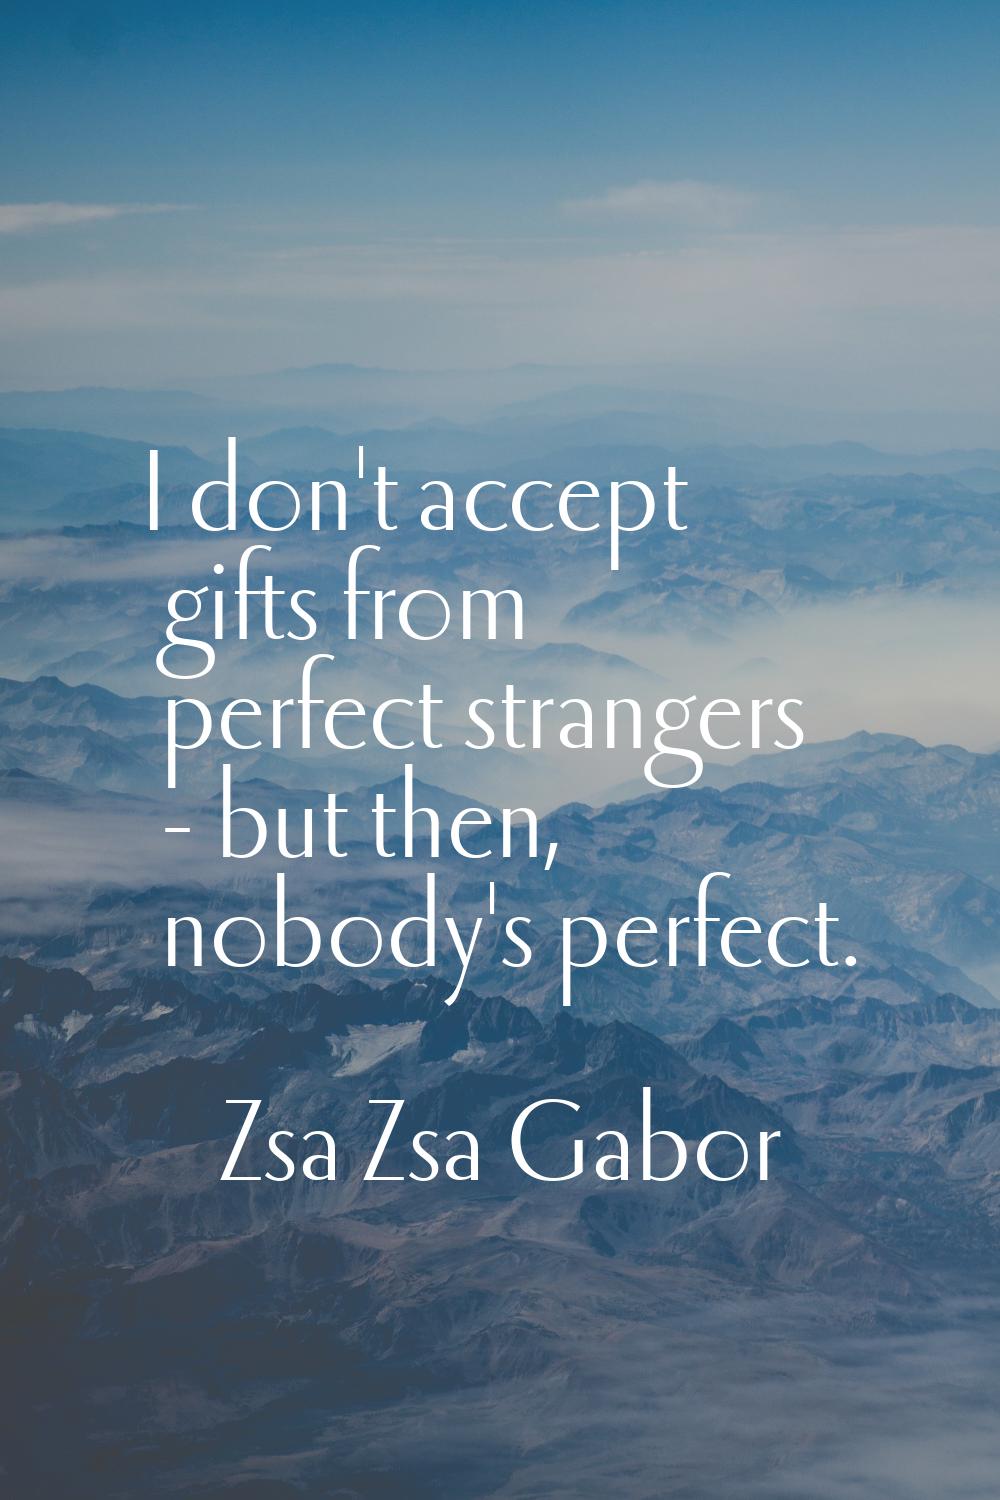 I don't accept gifts from perfect strangers - but then, nobody's perfect.